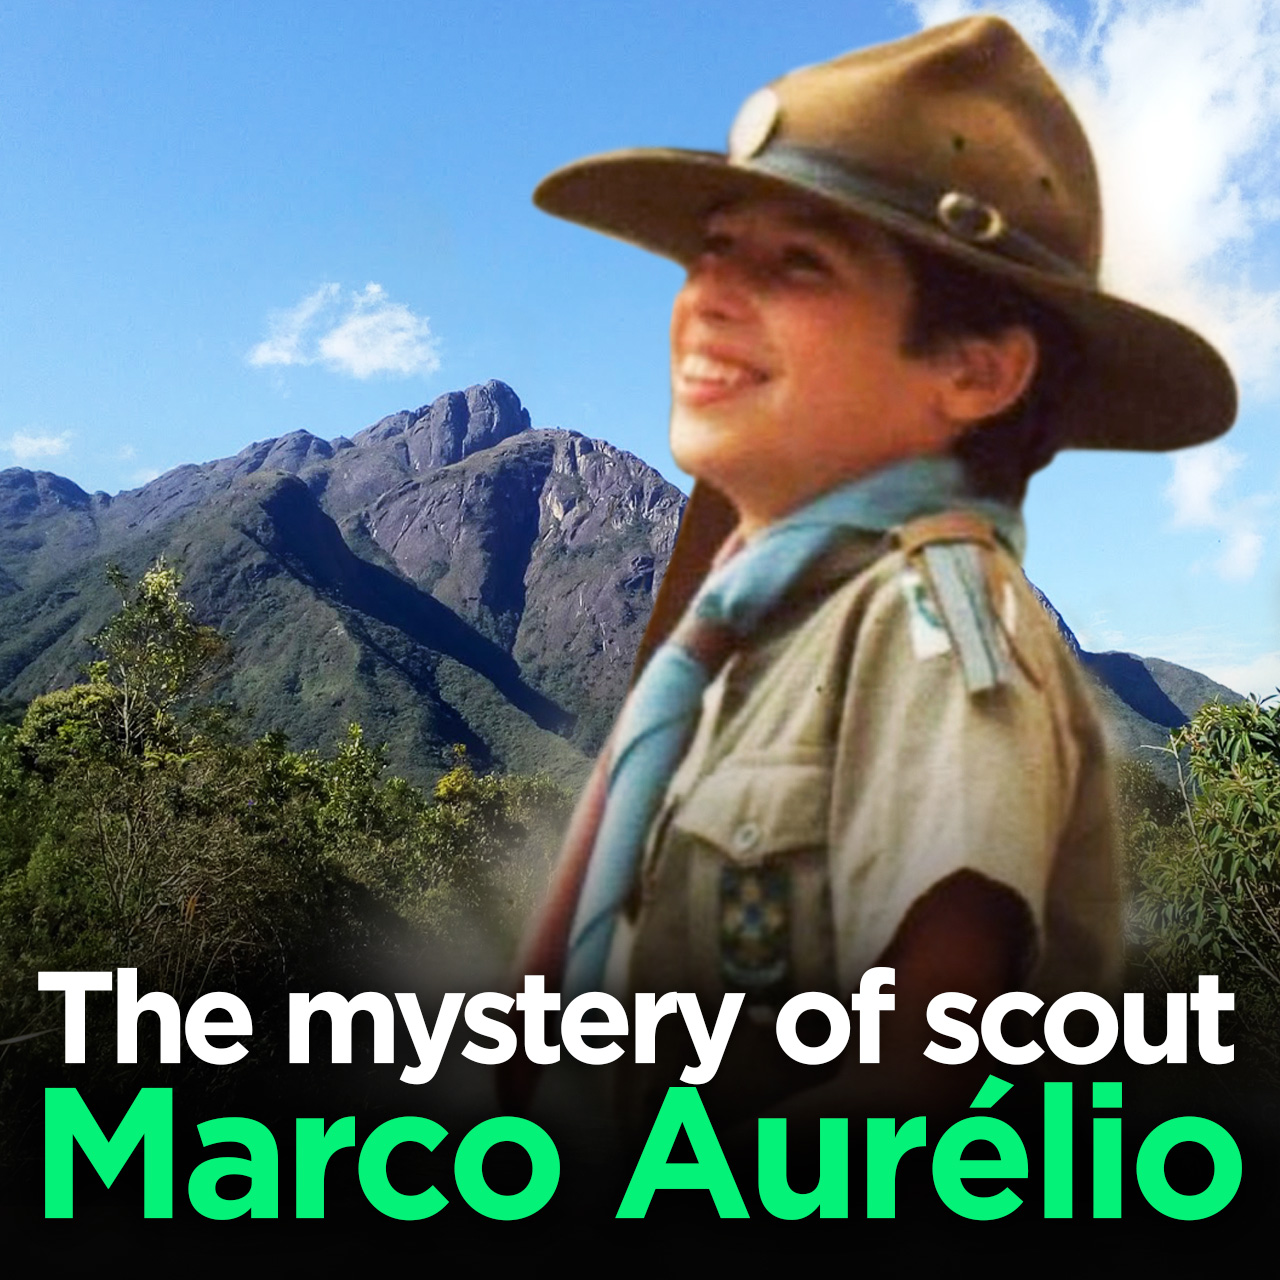 A 40 Year Old Brazilian UNEXPLAINED Mystery | Marco Aurelio